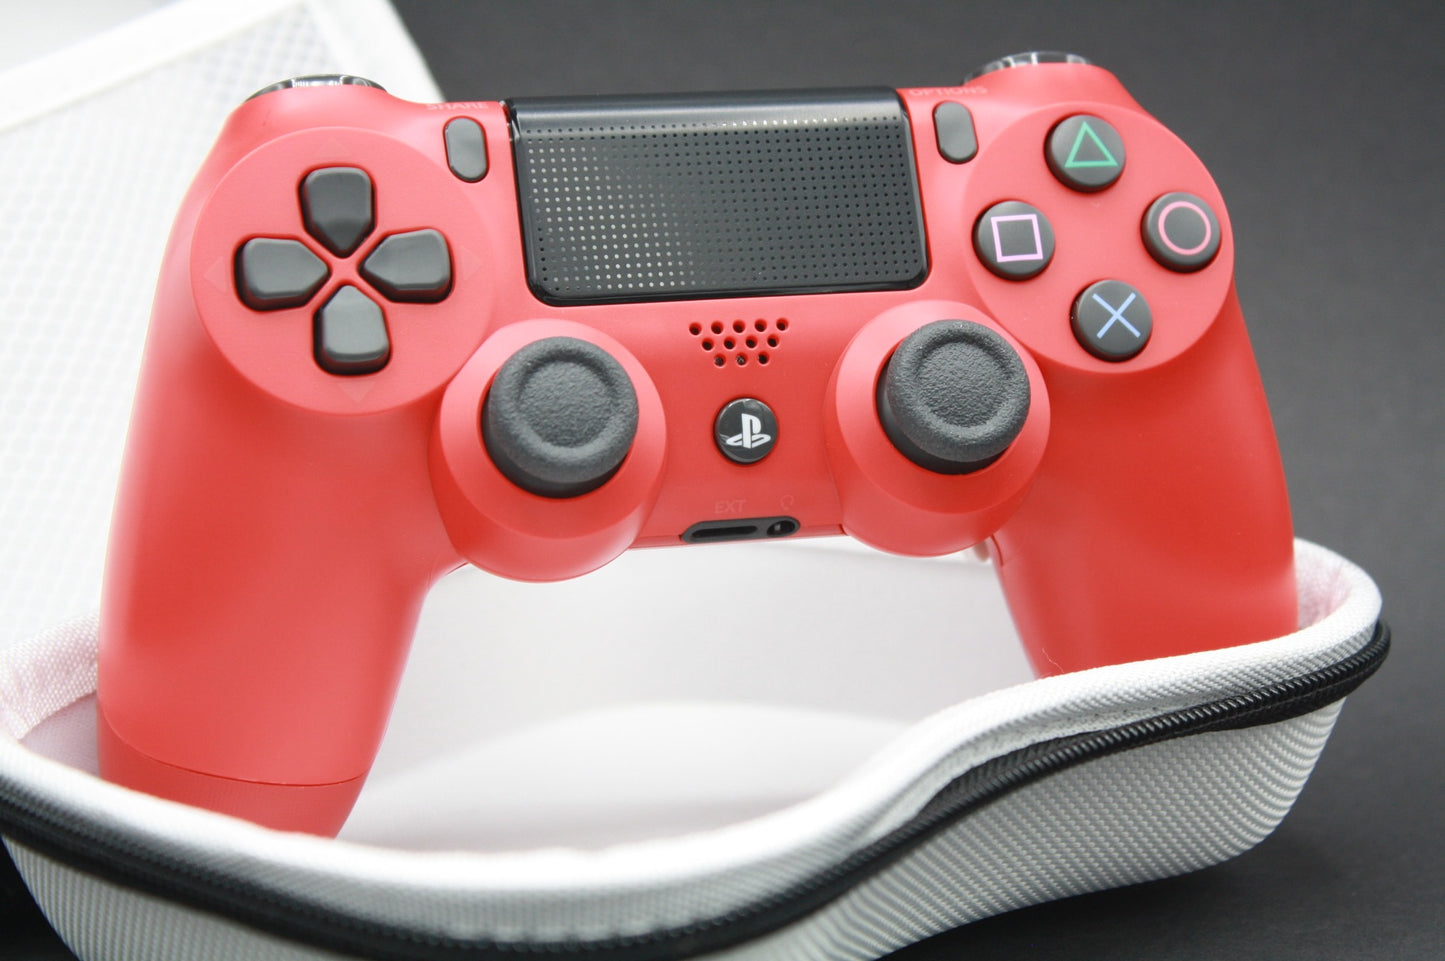 PS4 Controller "Magma Red" mit Zweier-Paddles